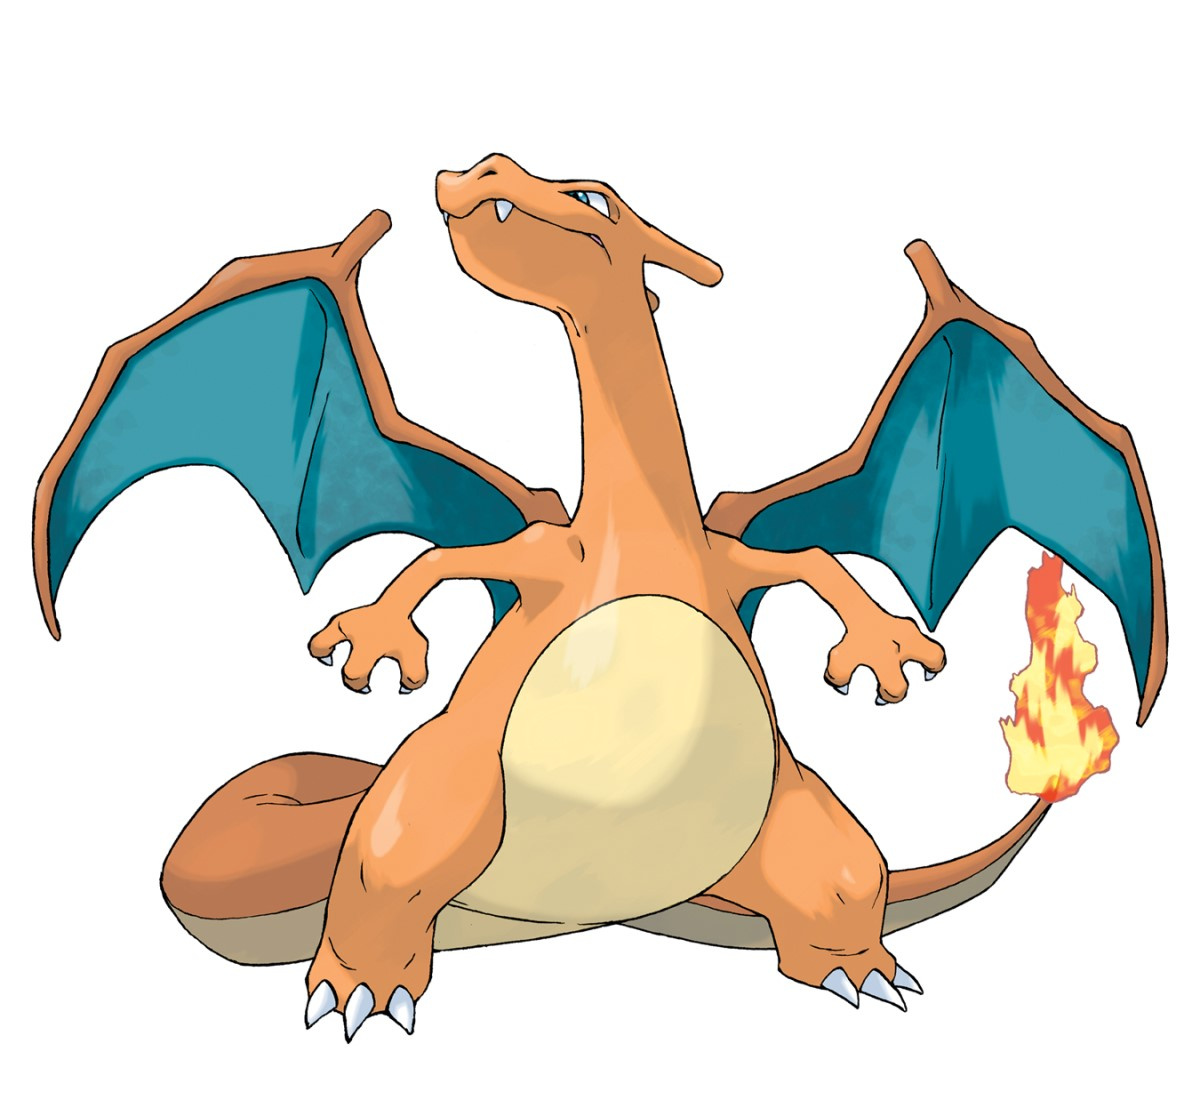 The answer is Charizard. 